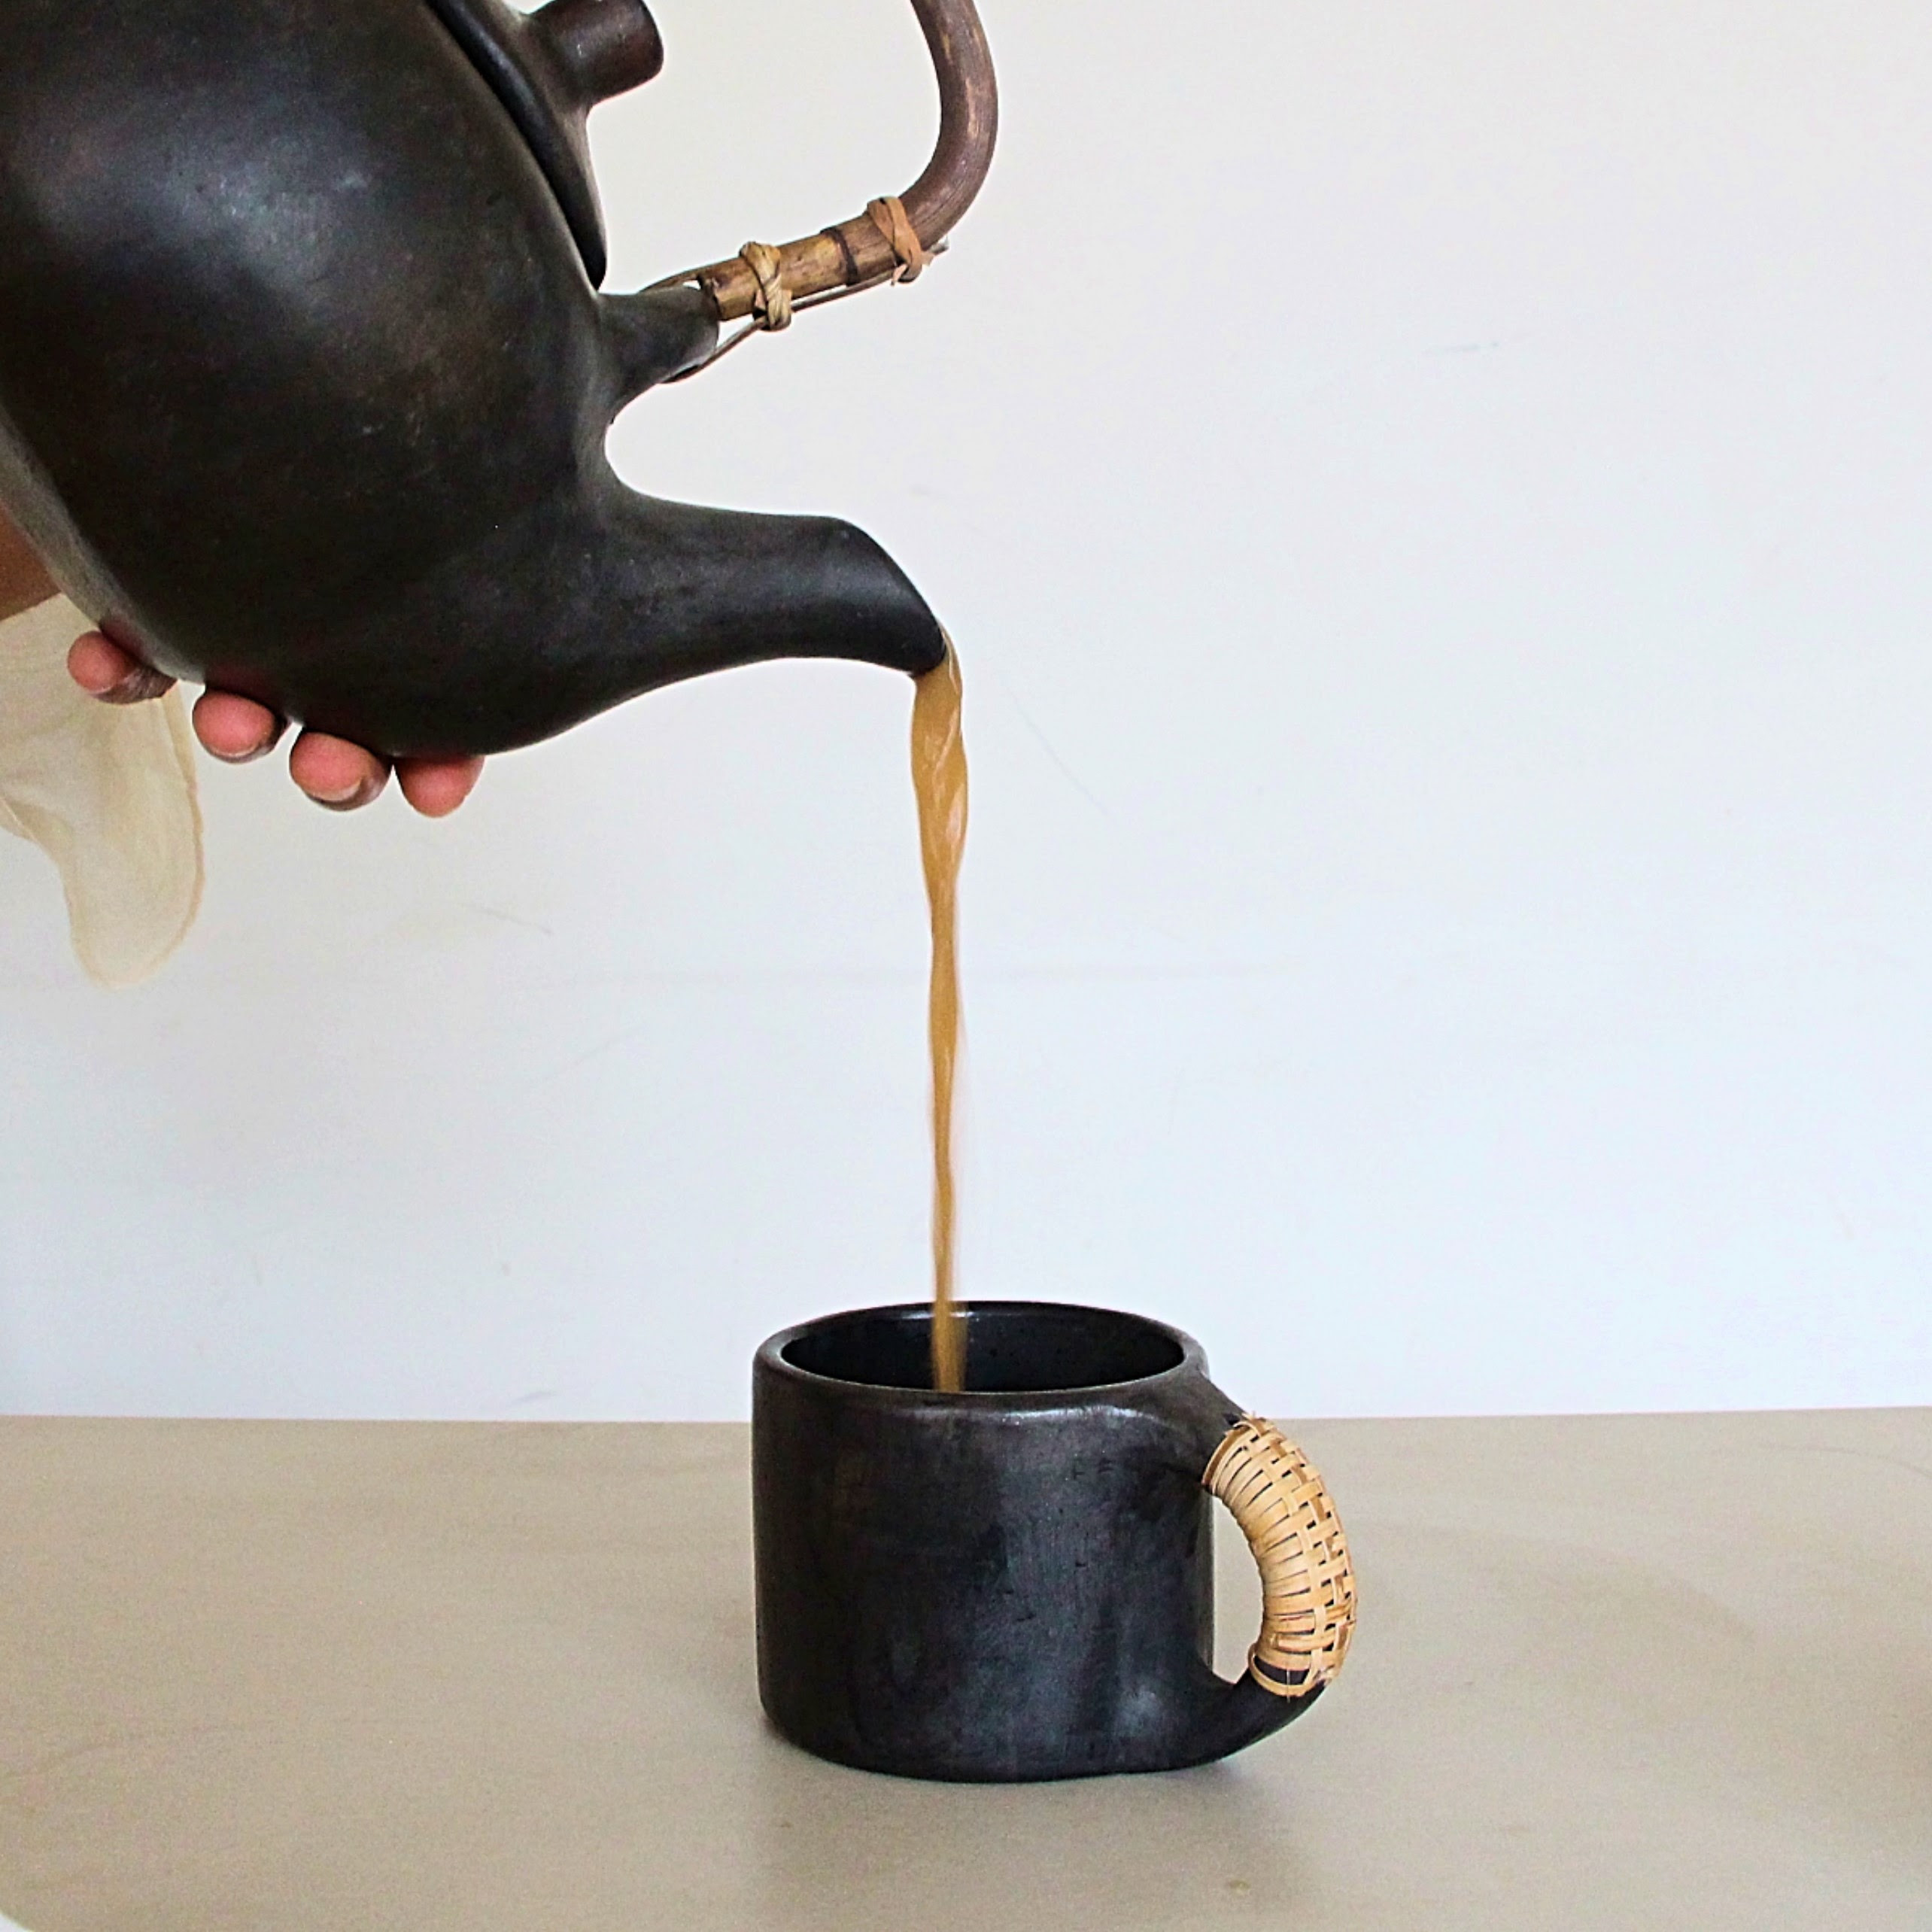 Tea being poured from a black teapot into a black mug